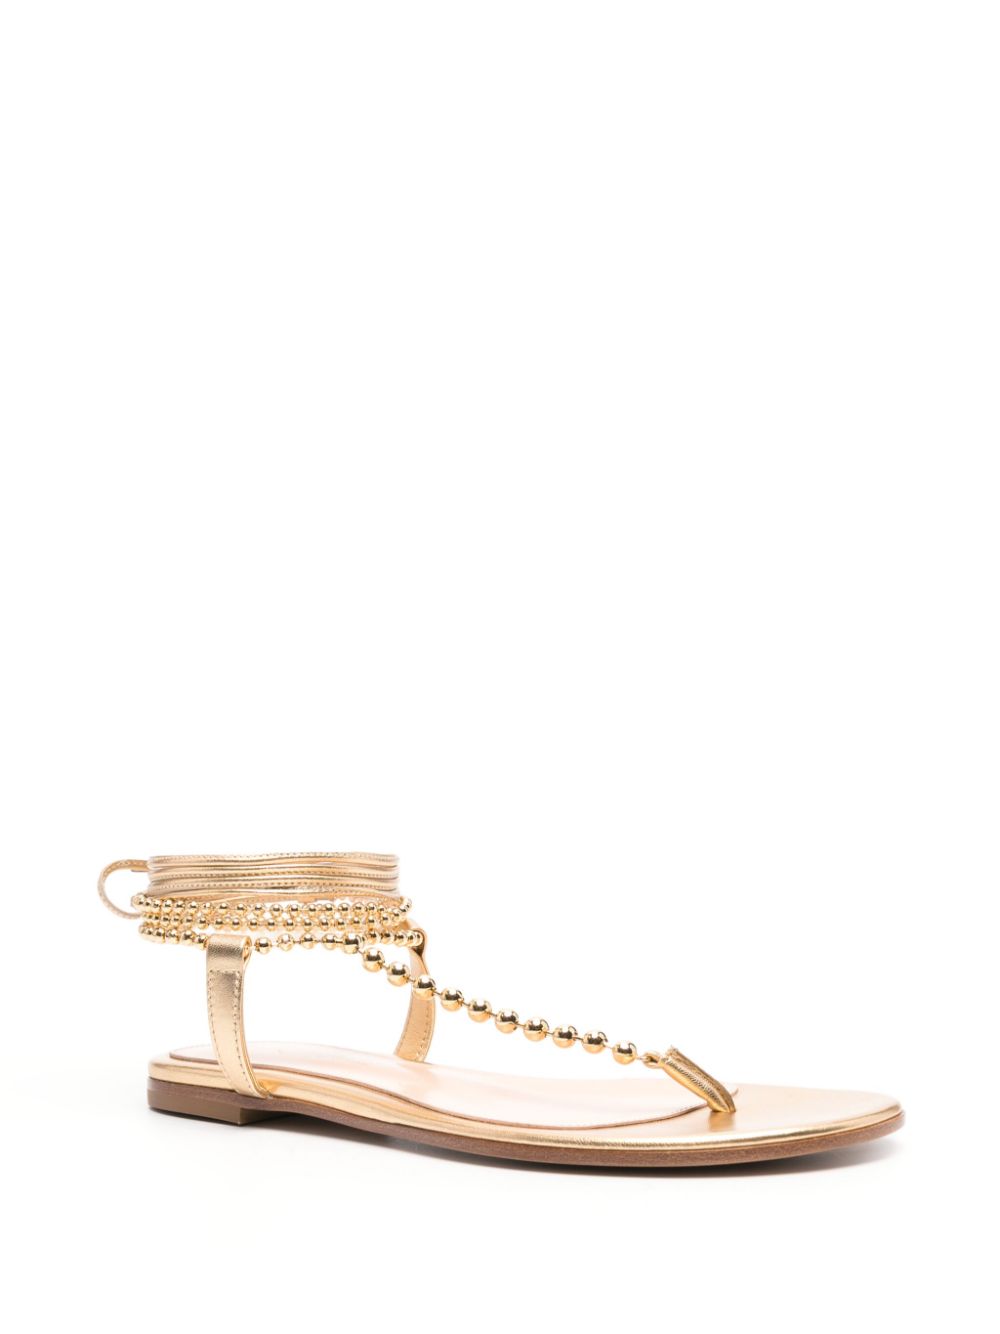 GIANVITO ROSSI Golden Leather Thong Sandals for Women with Metallic Bead Embellishment